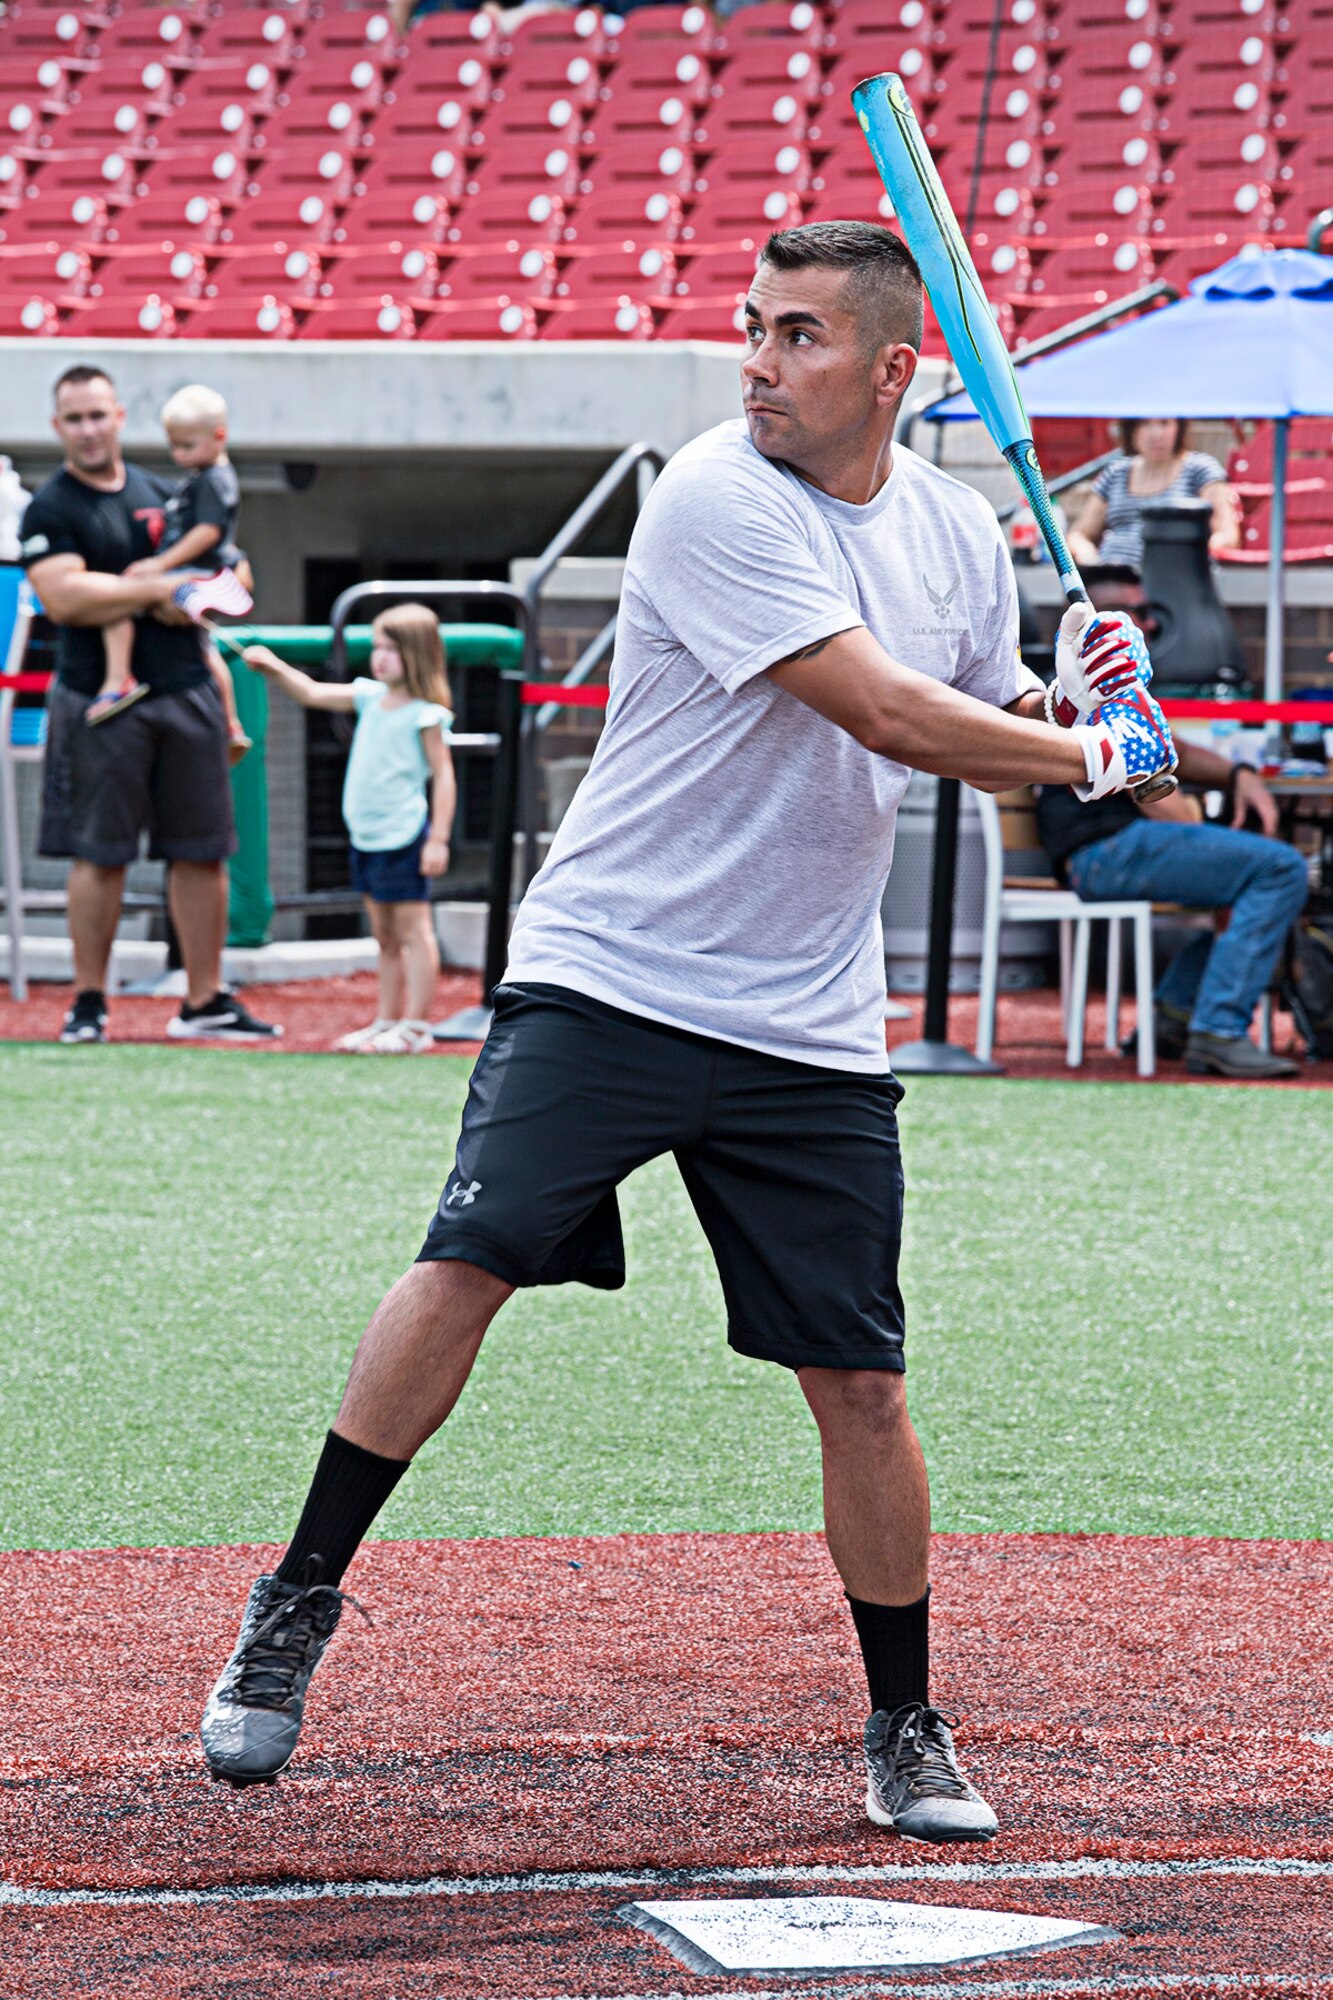 Tim Holmgren, 434th Security Forces Squadron, winds up for a big cut at a pitch during an inter-service homerun derby contest Aug. 18, 2018 at Kokomo Municipal Stadium, in Kokomo, Ind. Teams from the Army, Navy, Air Force and Marines engaged in the friendly competition. (U.S. Air Force photo/ Douglas Hays)